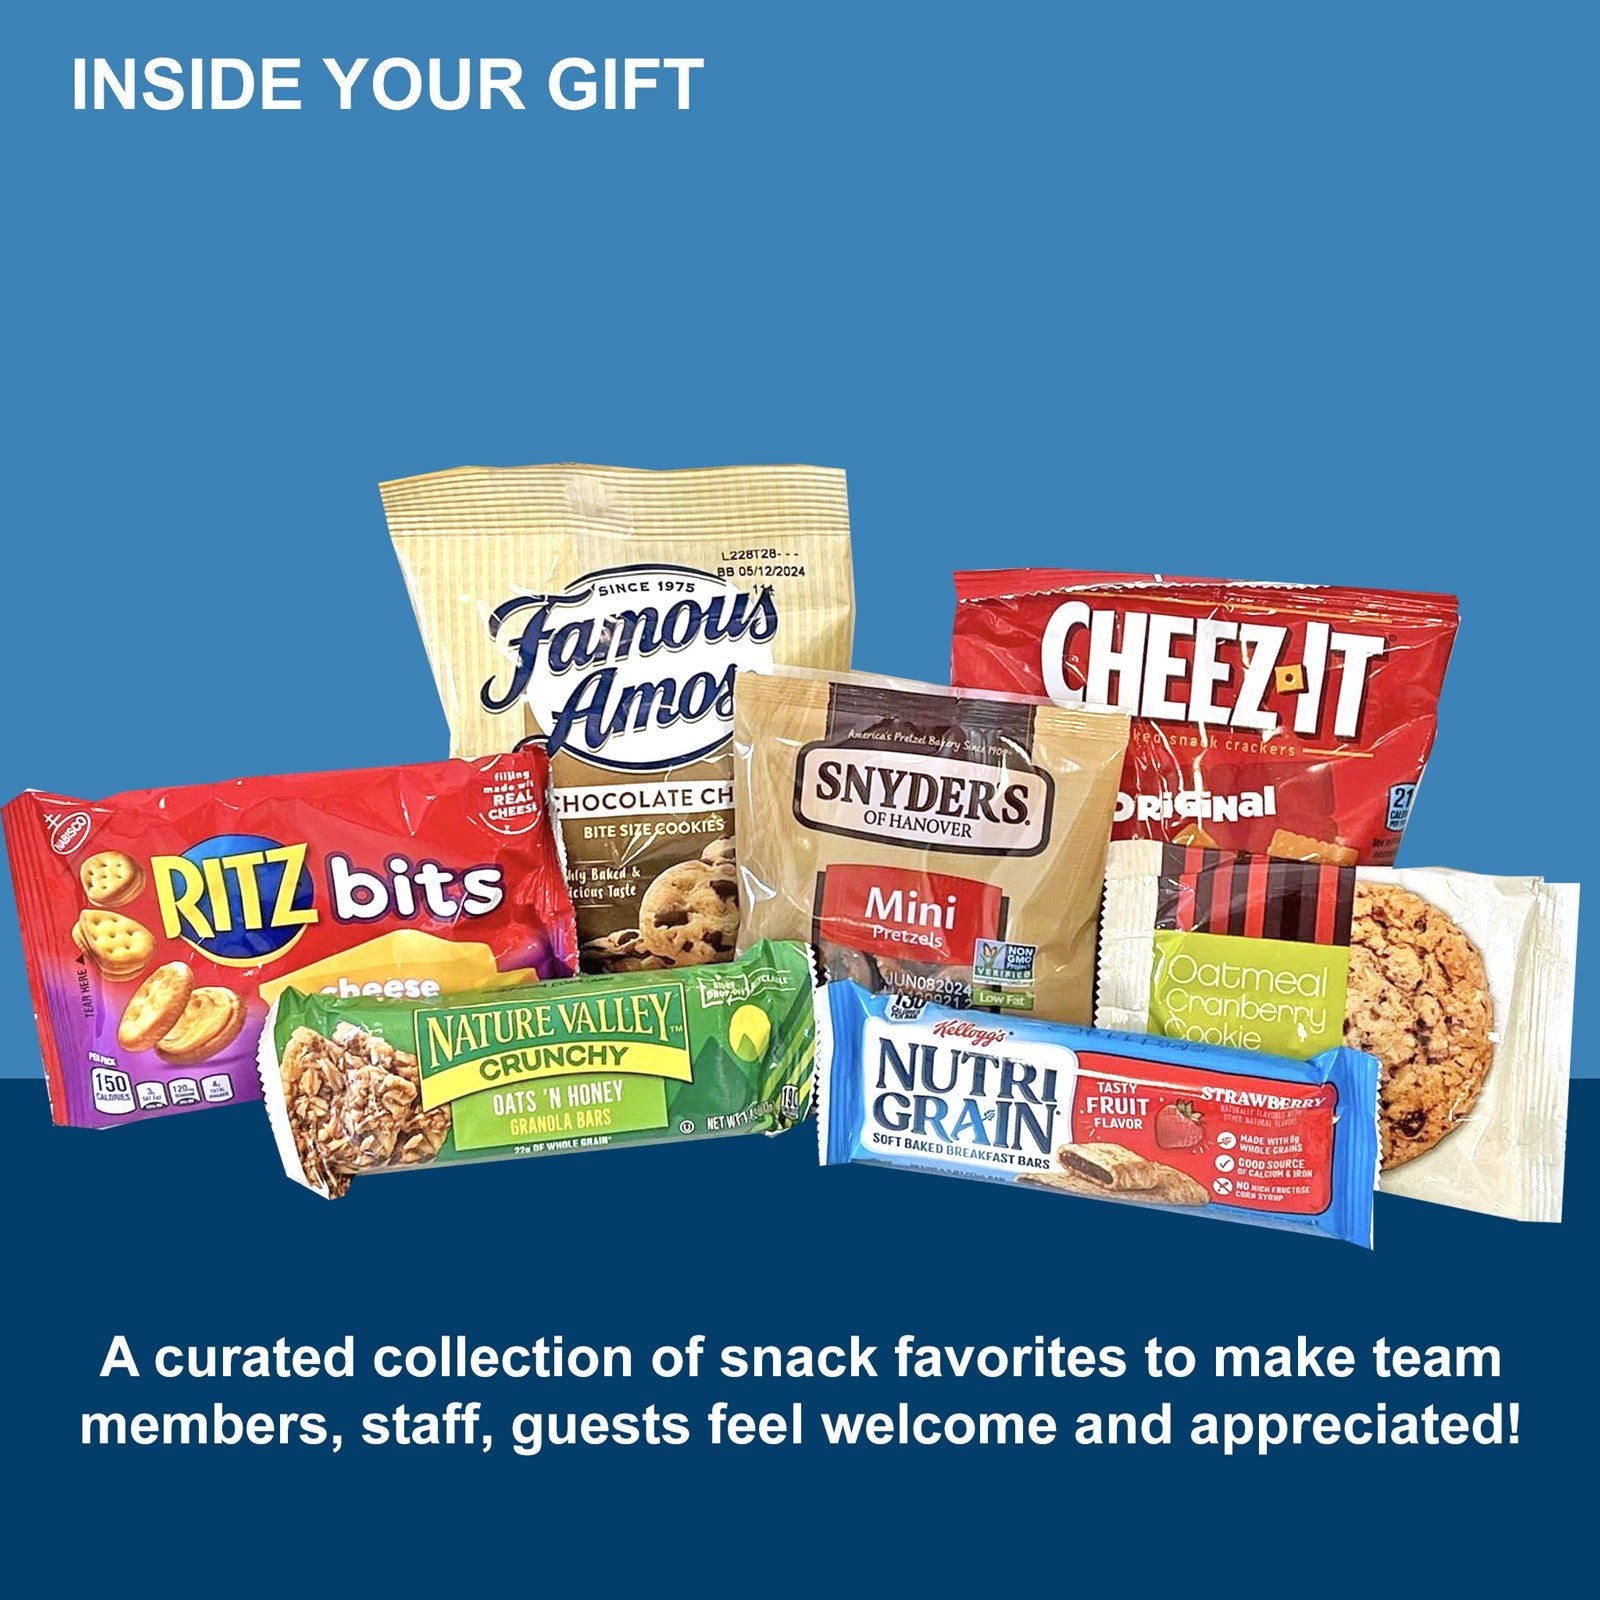 Welcome Gift Box with Cookies, Pretzels, Crackers and Snacks for New Homeowner, New Team Member, New Job